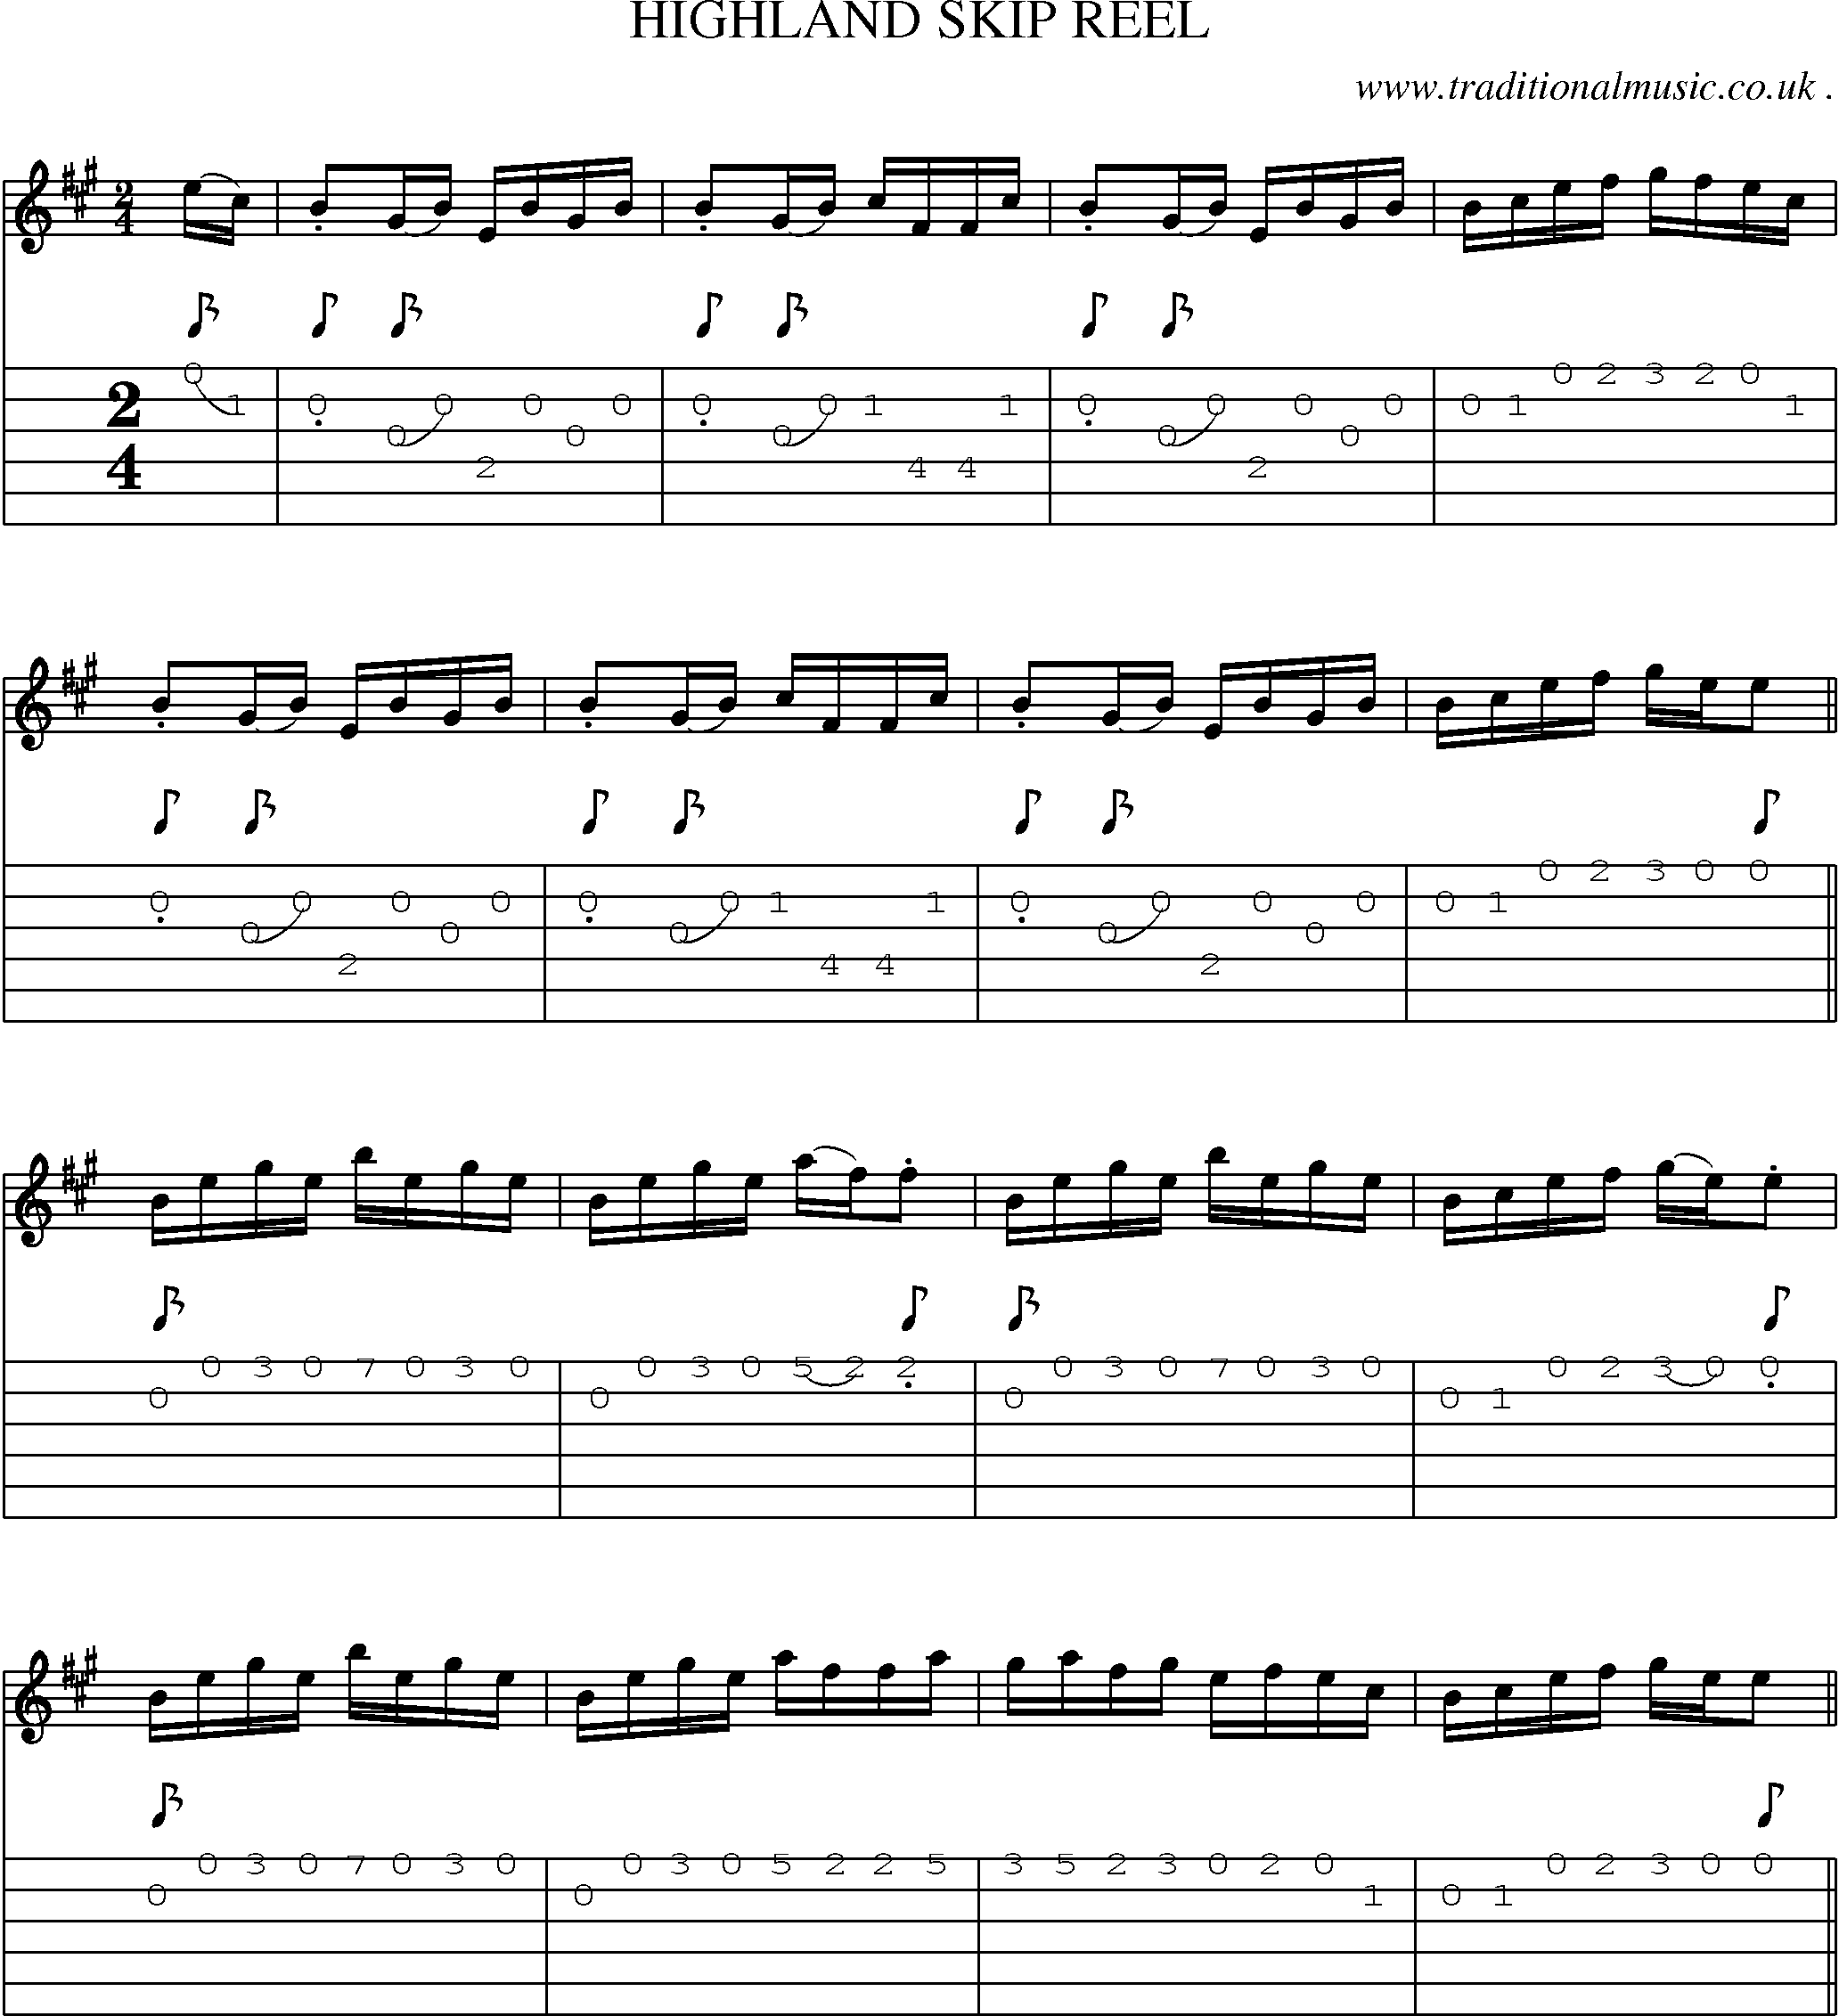 Sheet-Music and Guitar Tabs for Highland Skip Reel